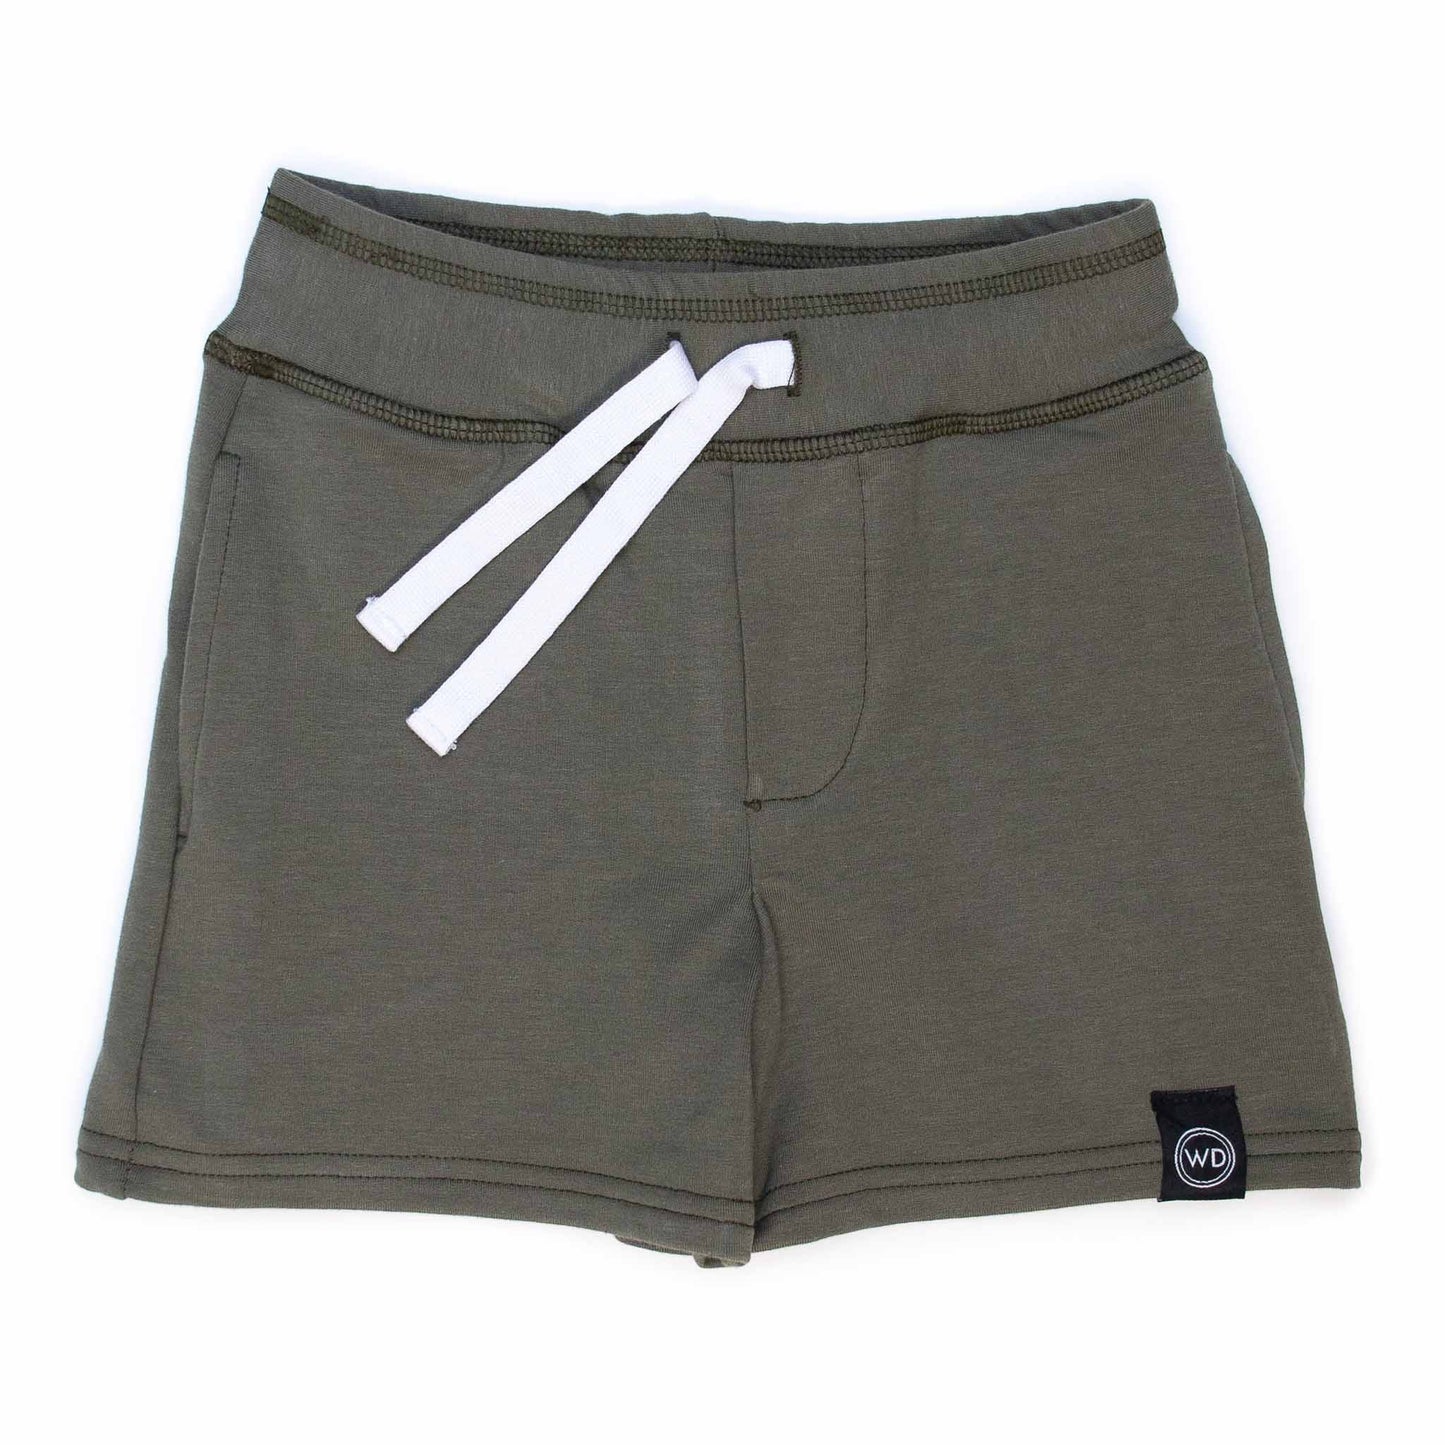 Kids Bamboo French Terry Shorts